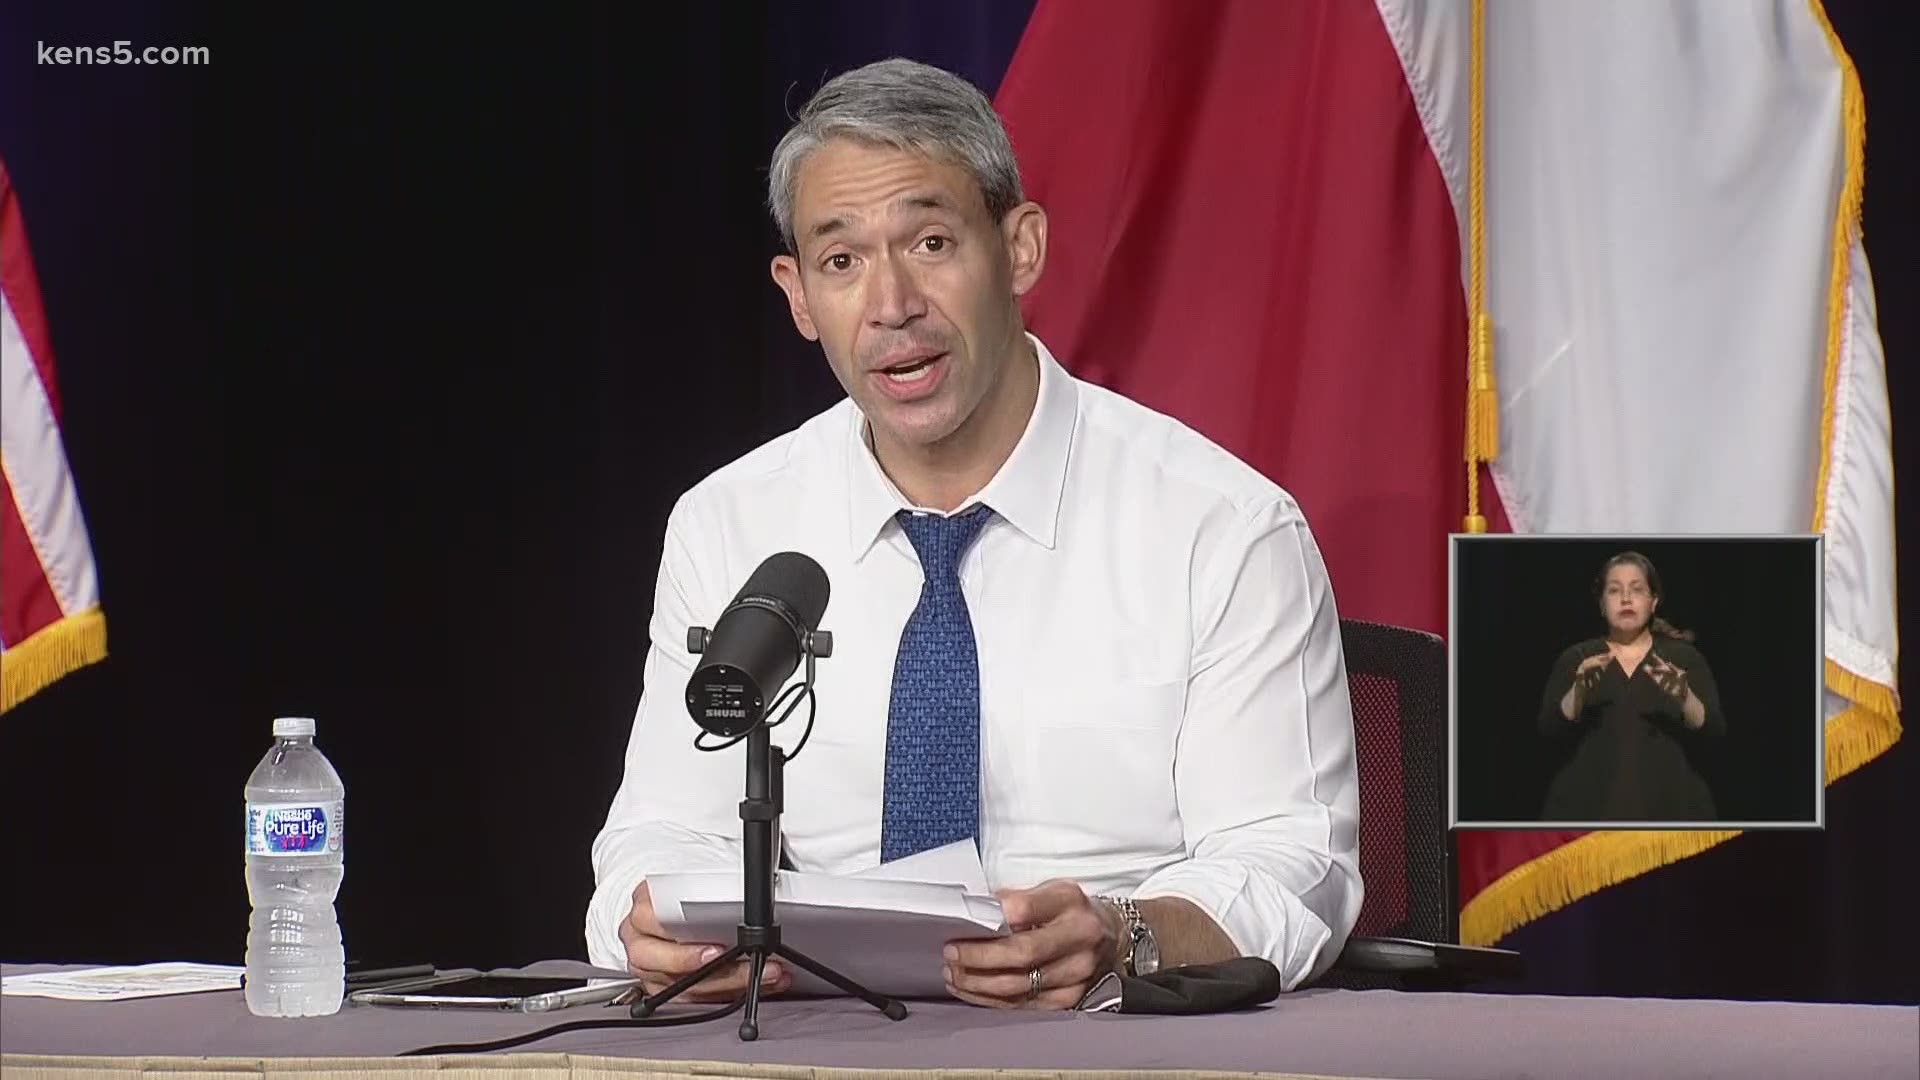 "We're not done fighting this virus," said Mayor Nirenberg. He announced 436 new cases on Tuesday, by far the largest single-day increase yet.